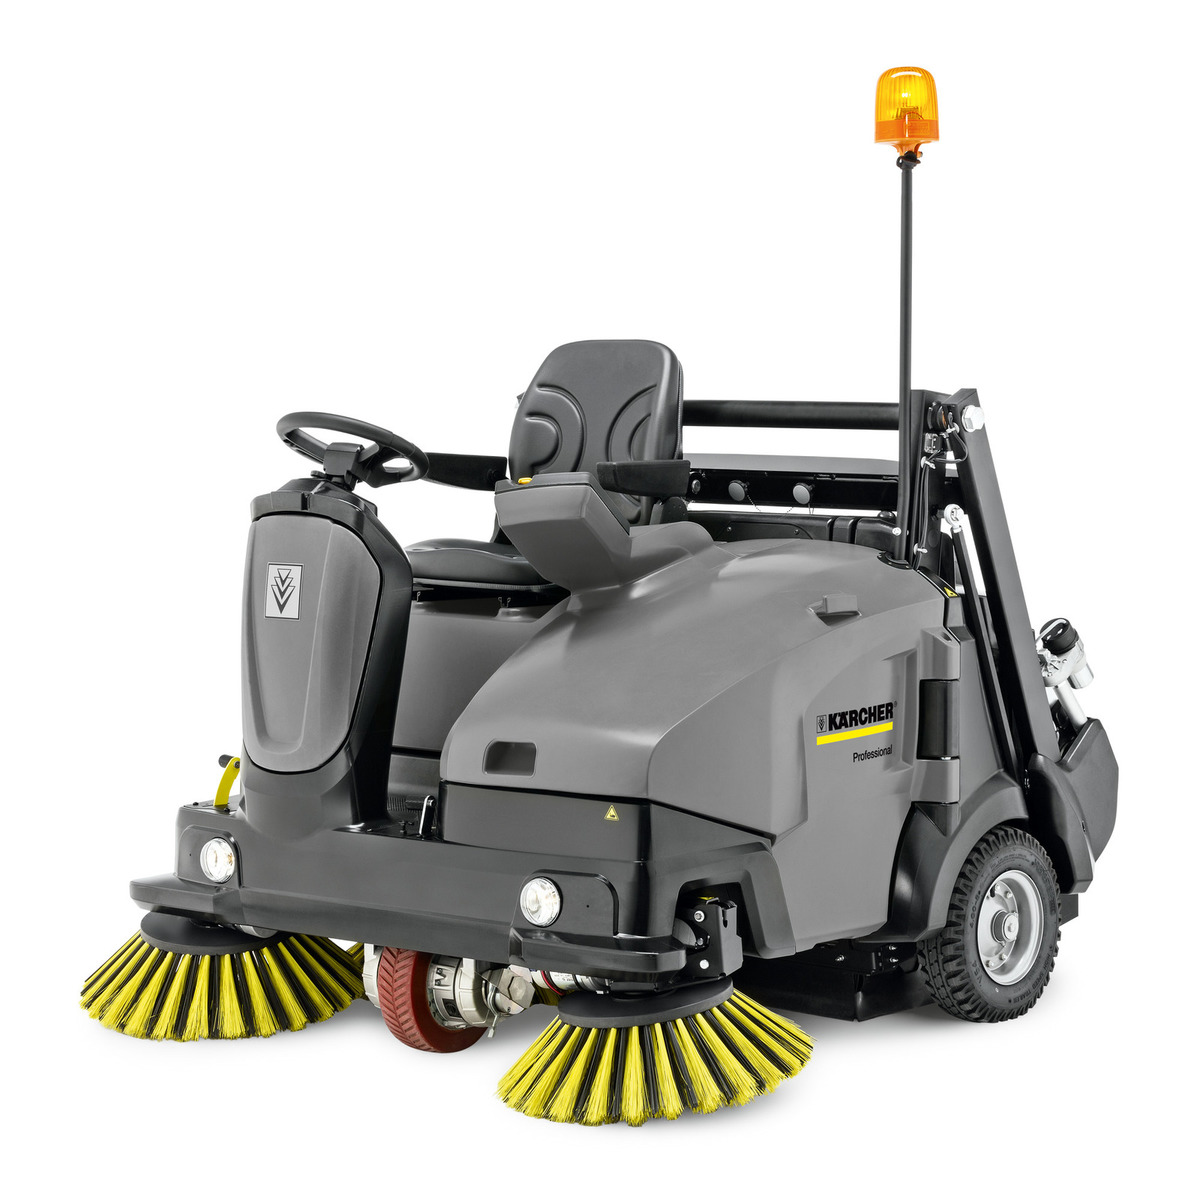 Karcher KM 125/130 R Bp Karcher, commercial, ride-on, industrial, sweeper, sweep, clean, large, area, driving, KM, 125/130 R Bp, 